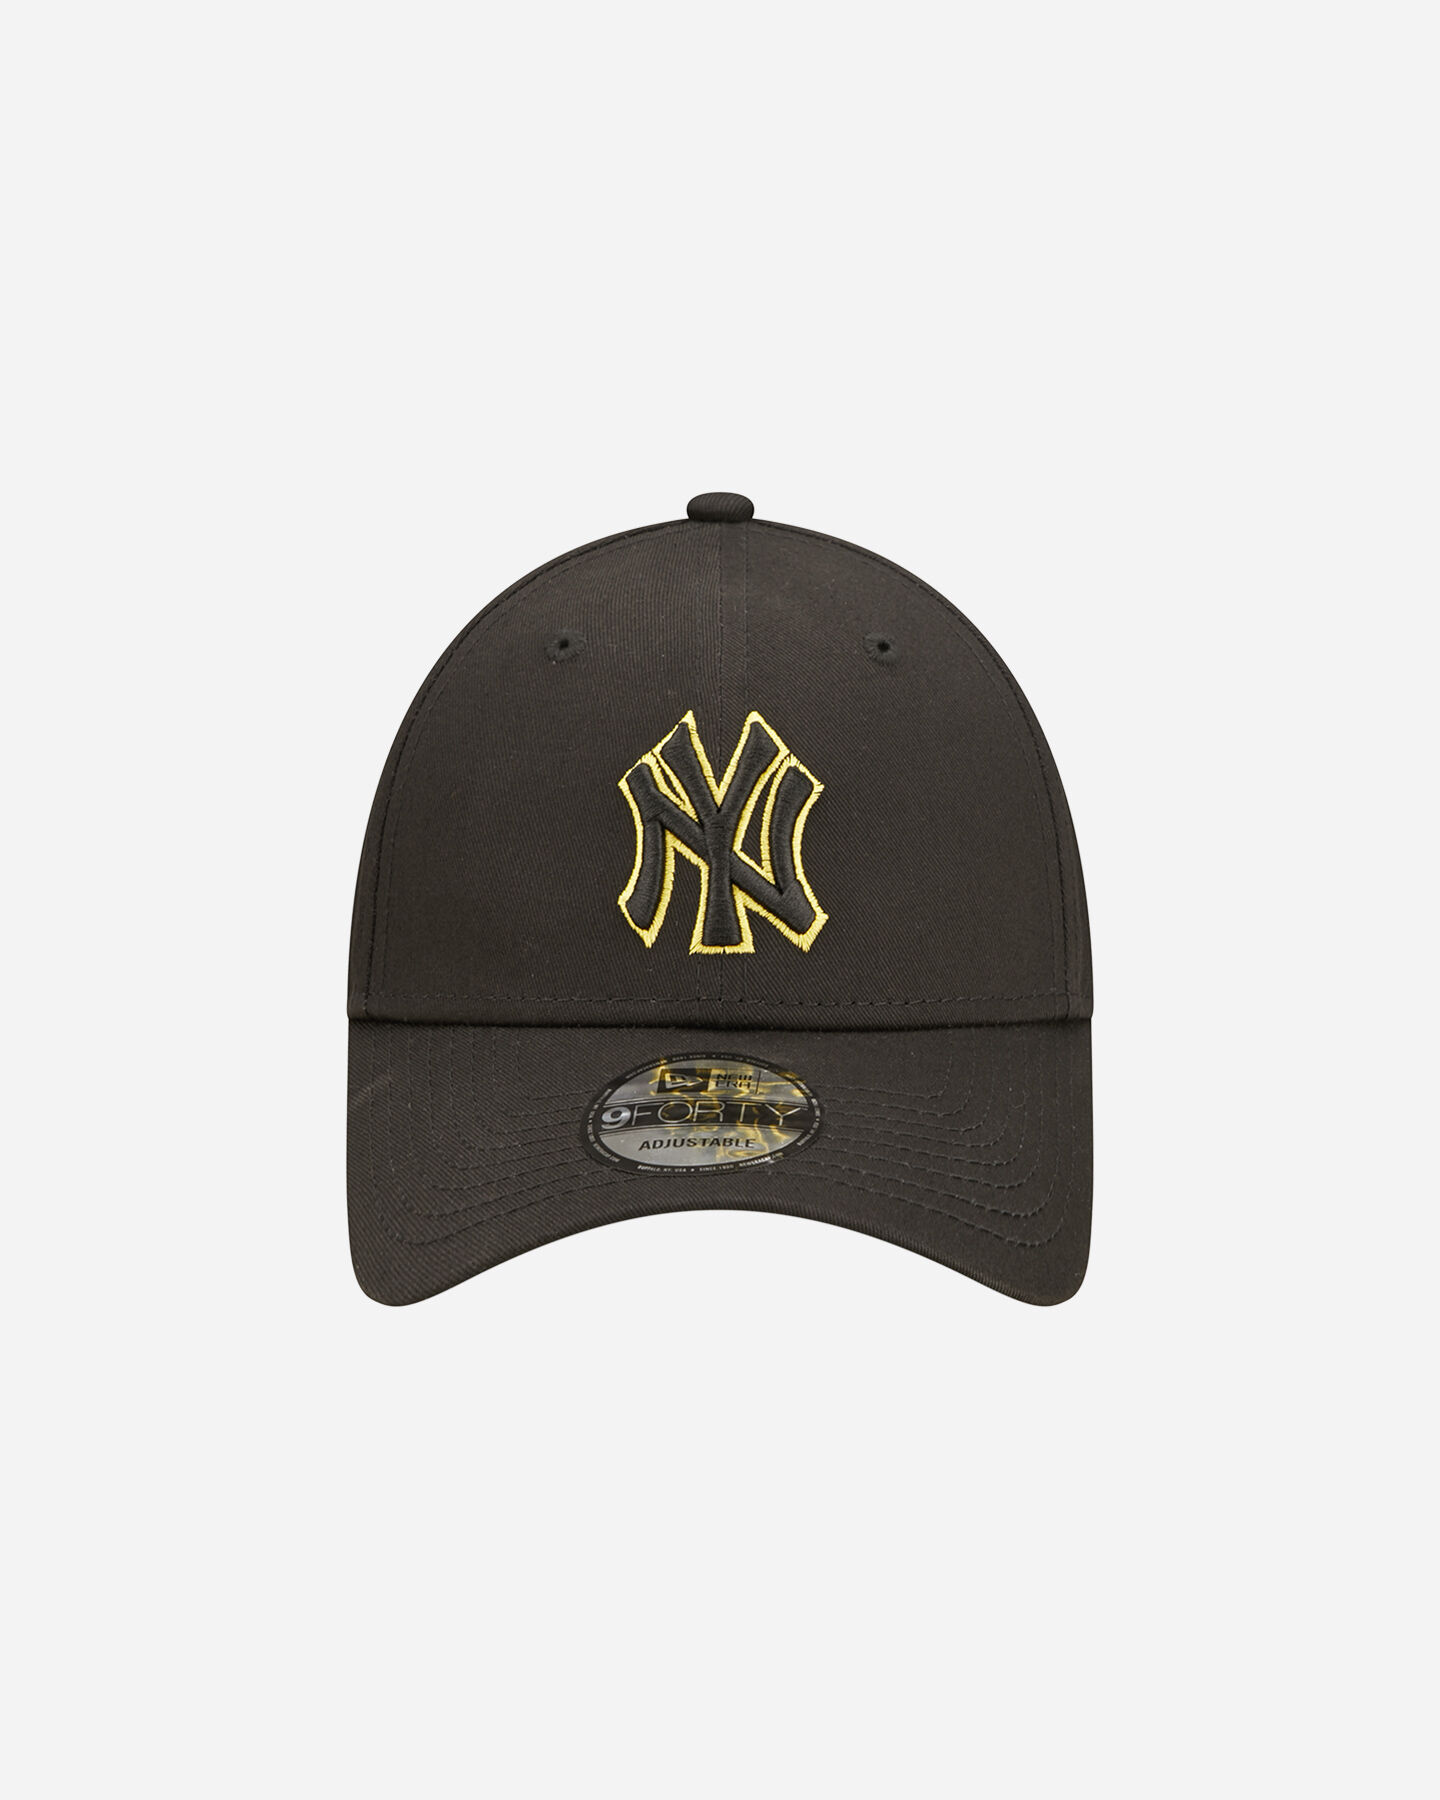  Cappellino NEW ERA 9FORTY TEAM OUTLINE NY YANKEES  S5546167|001|OSFM scatto 1